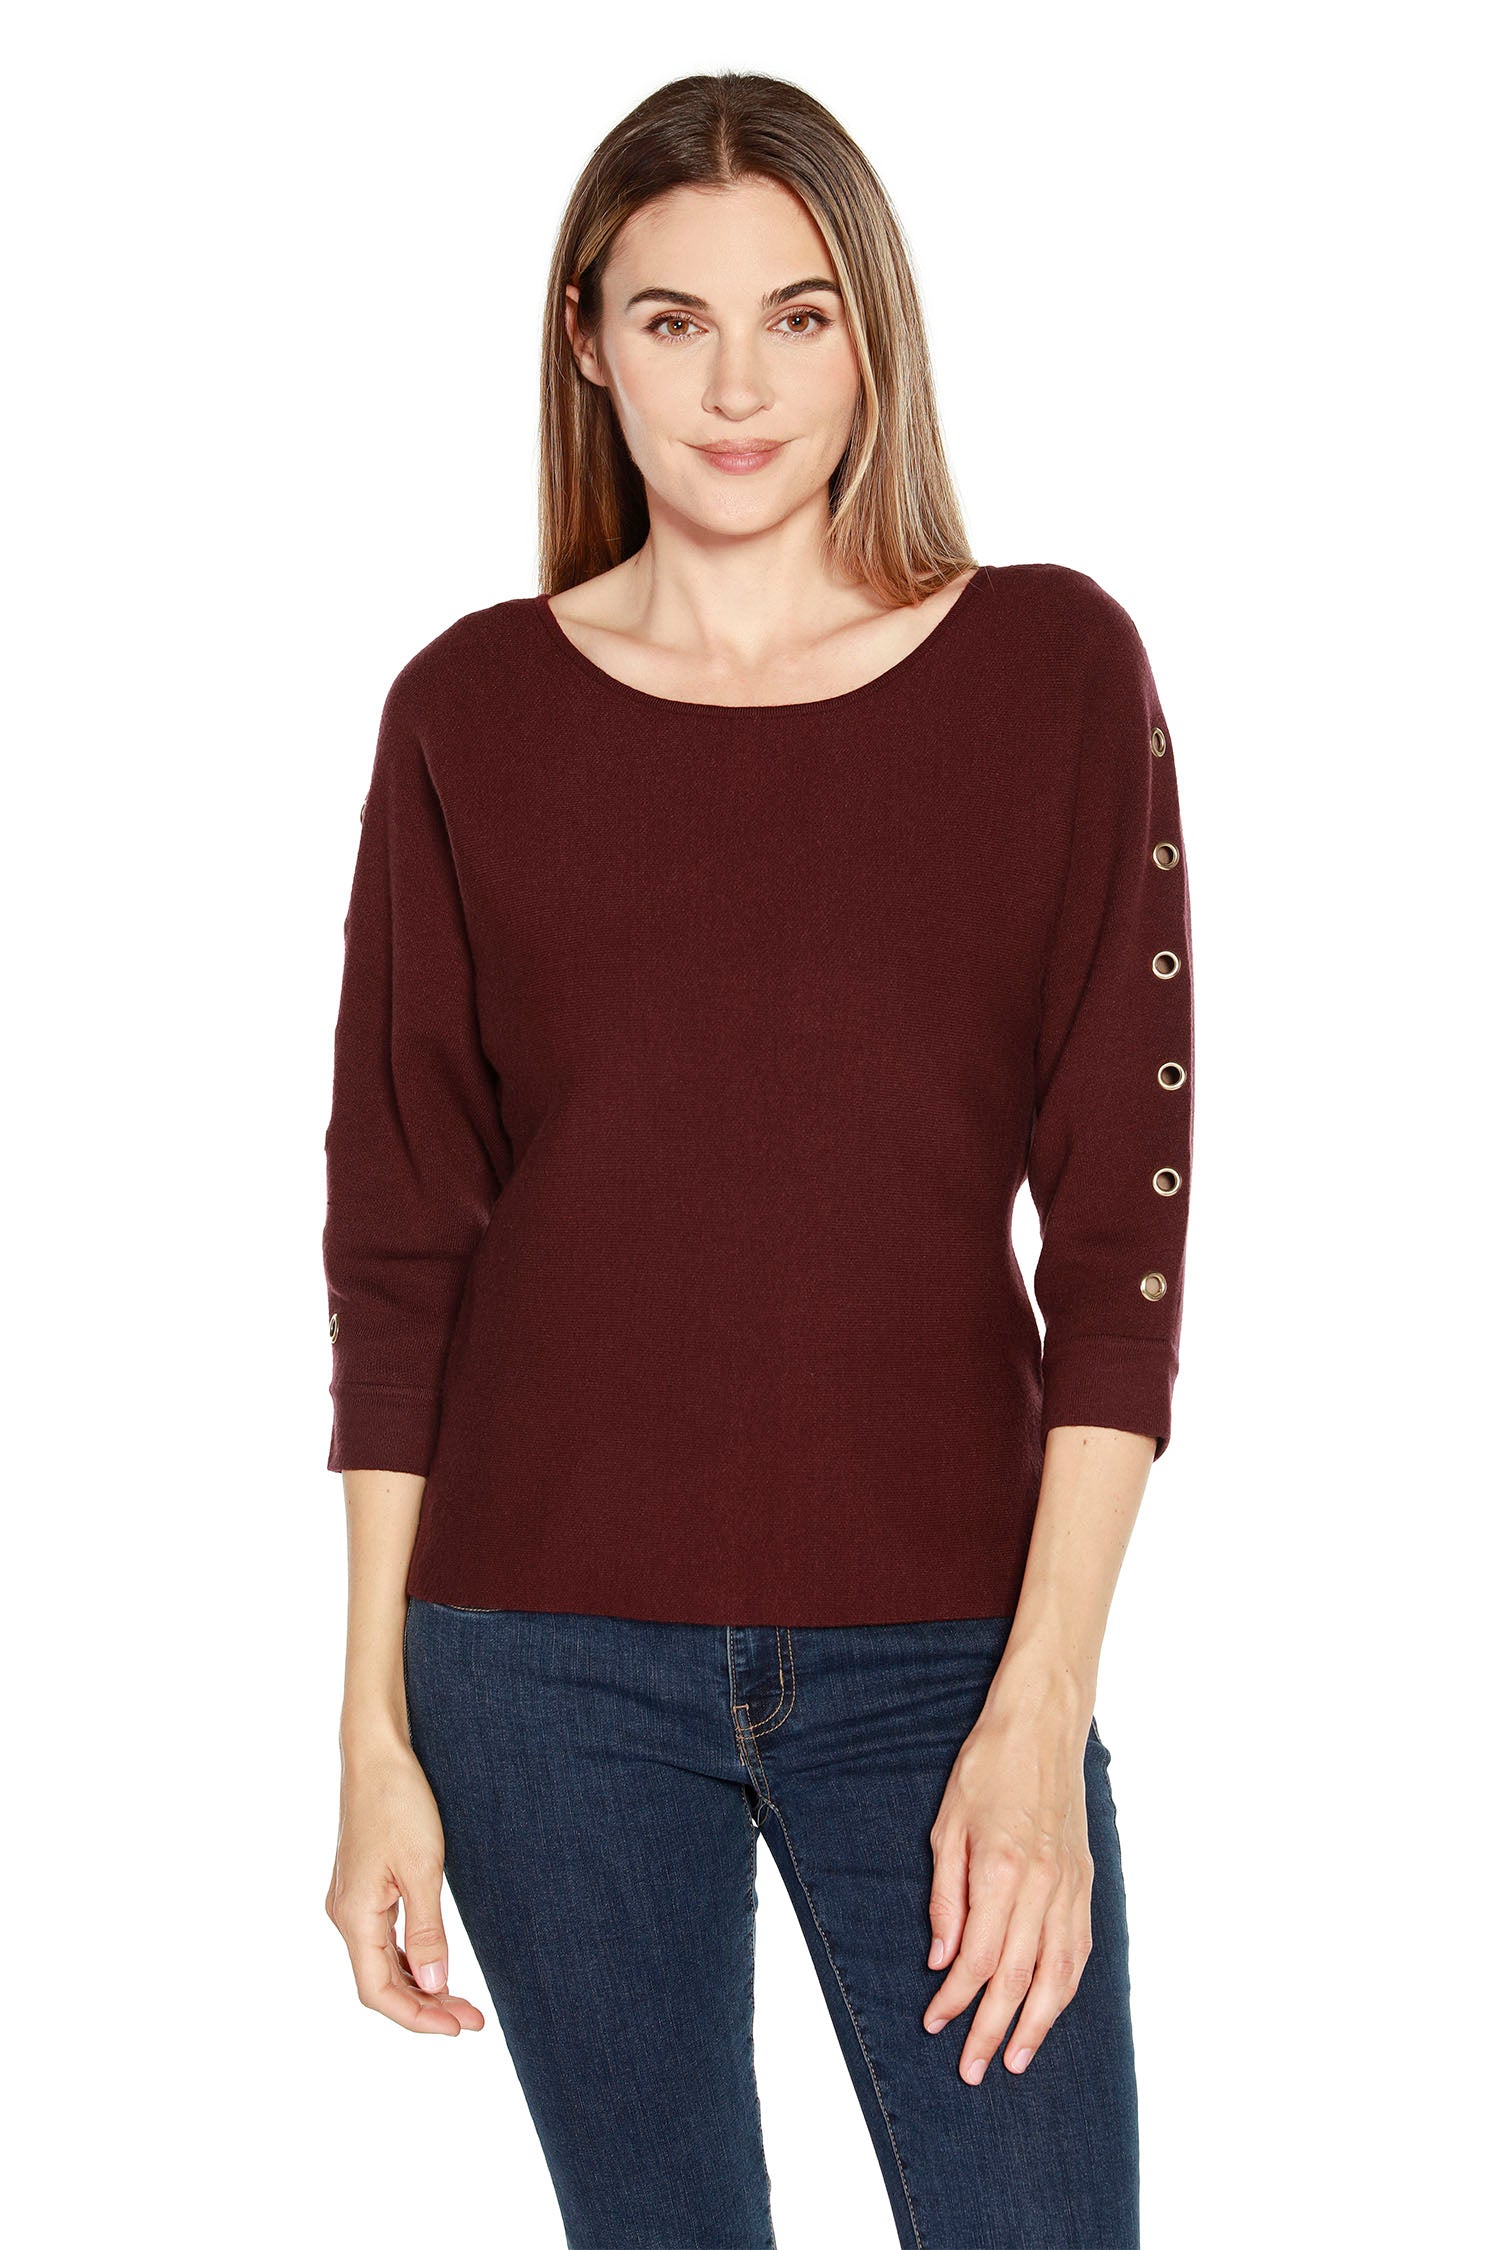 Crafted in a super soft knit fabric, this contemporary dolman sweater is the perfect choice for any modern woman's wardrobe. Featuring a loose and comfortable fit with 3/4 sleeves and grommet trim, this sweater adds a modern touch to any look. 